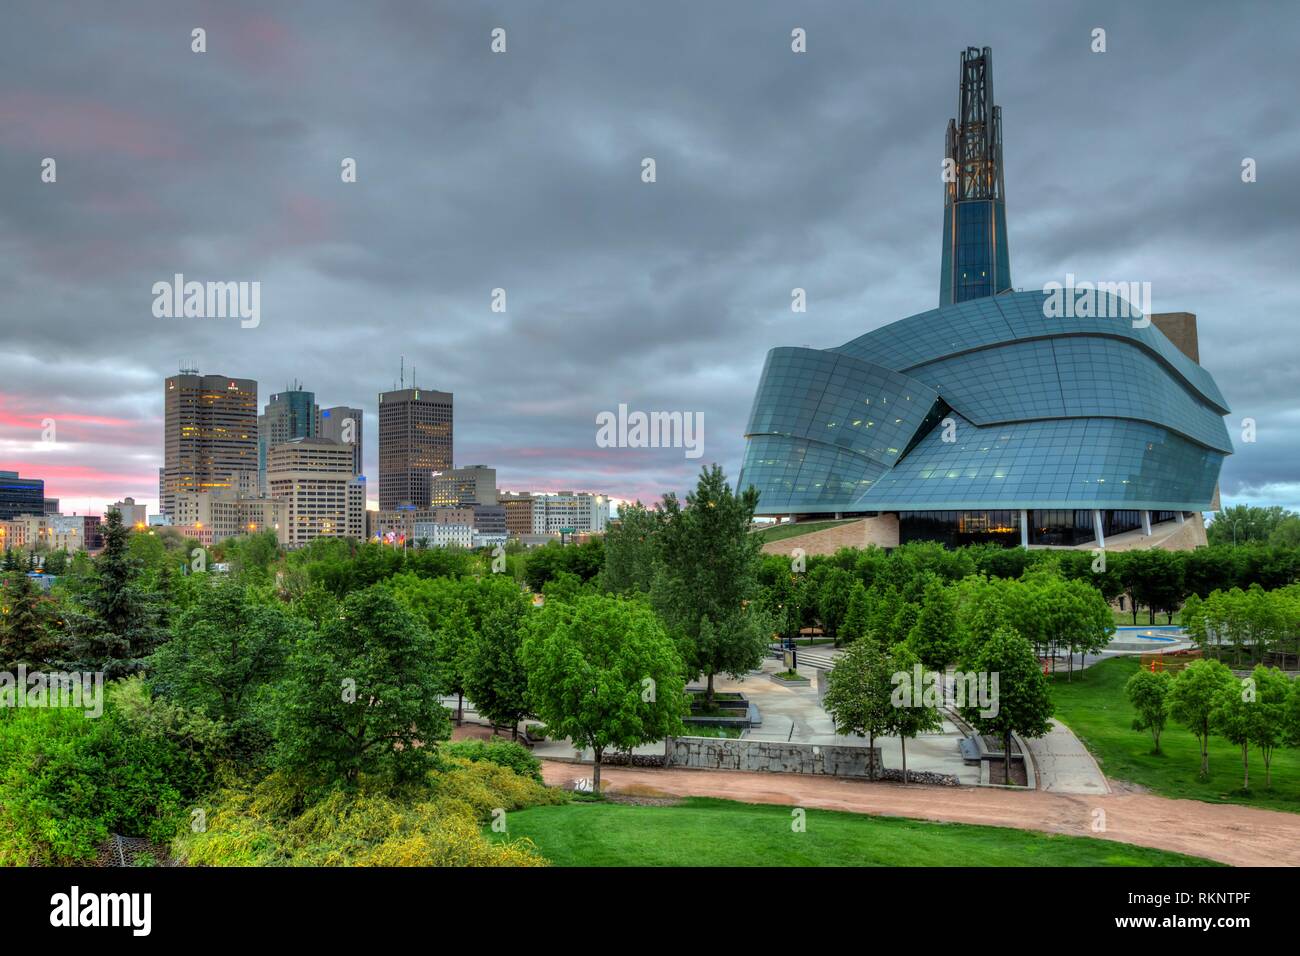 The city skyline of Winnipeg, Manitoba Canada from The forks National Historic site. Stock Photo